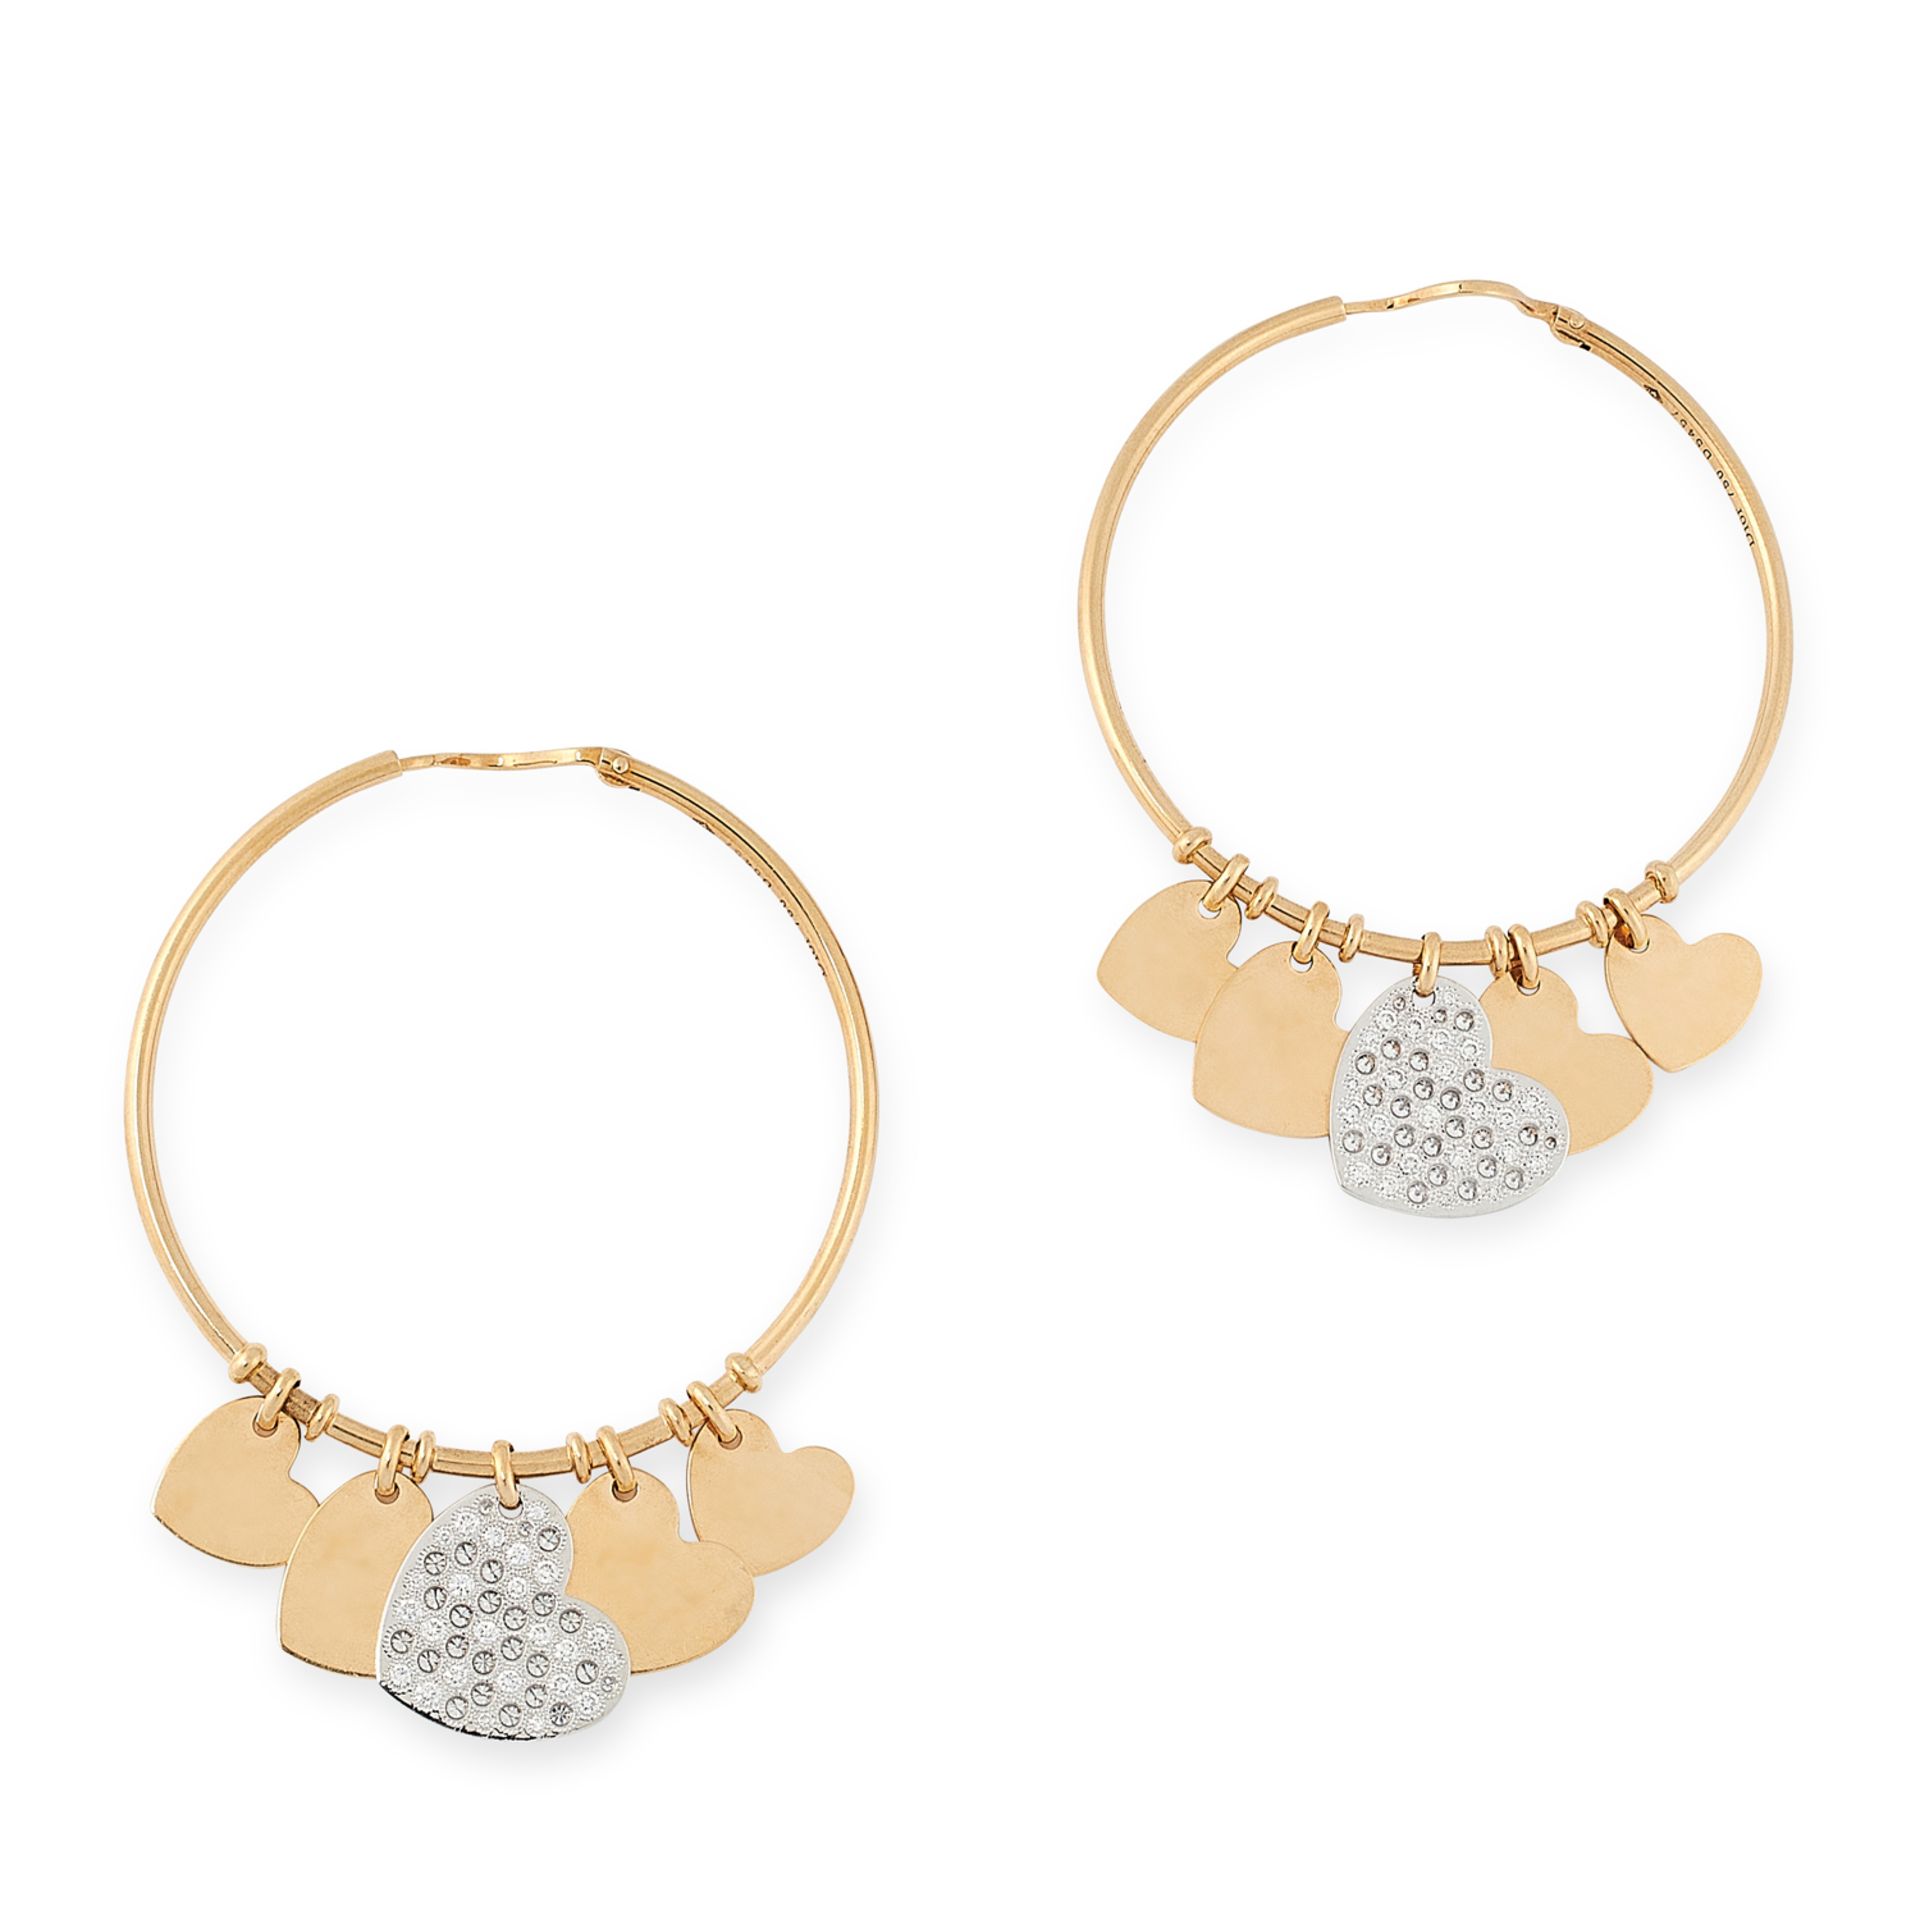 A PAIR OF DIAMOND HOOP EARRINGS, DIOR in 18ct yellow gold, each designed as a large open hoop